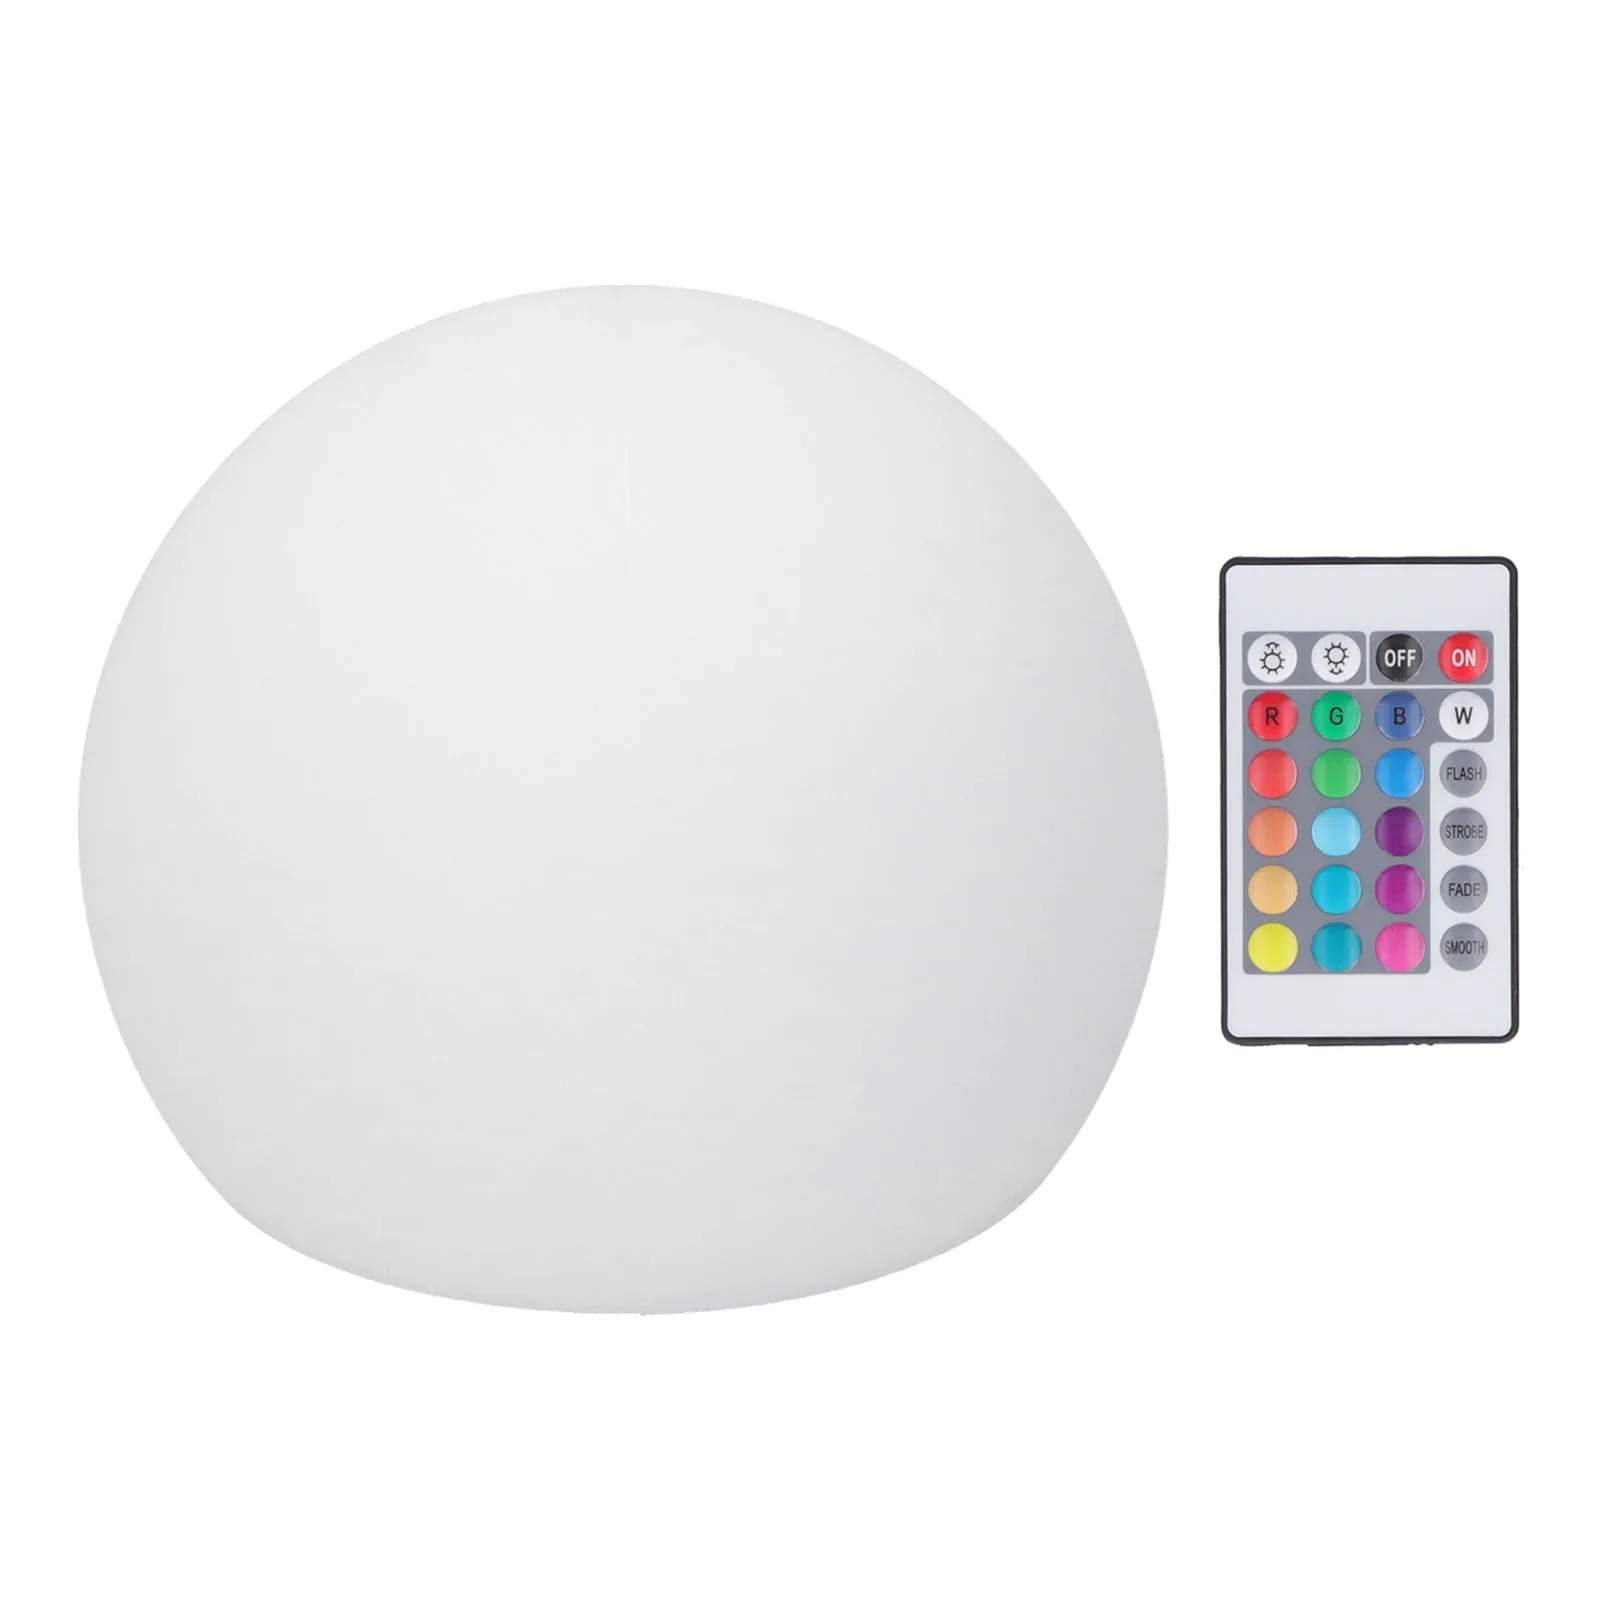 

LED Ball Light 24 Key Remote Control RGBW Globe Lamp Night Light with 16 Color Dimmable 4 Modes 15x15cm